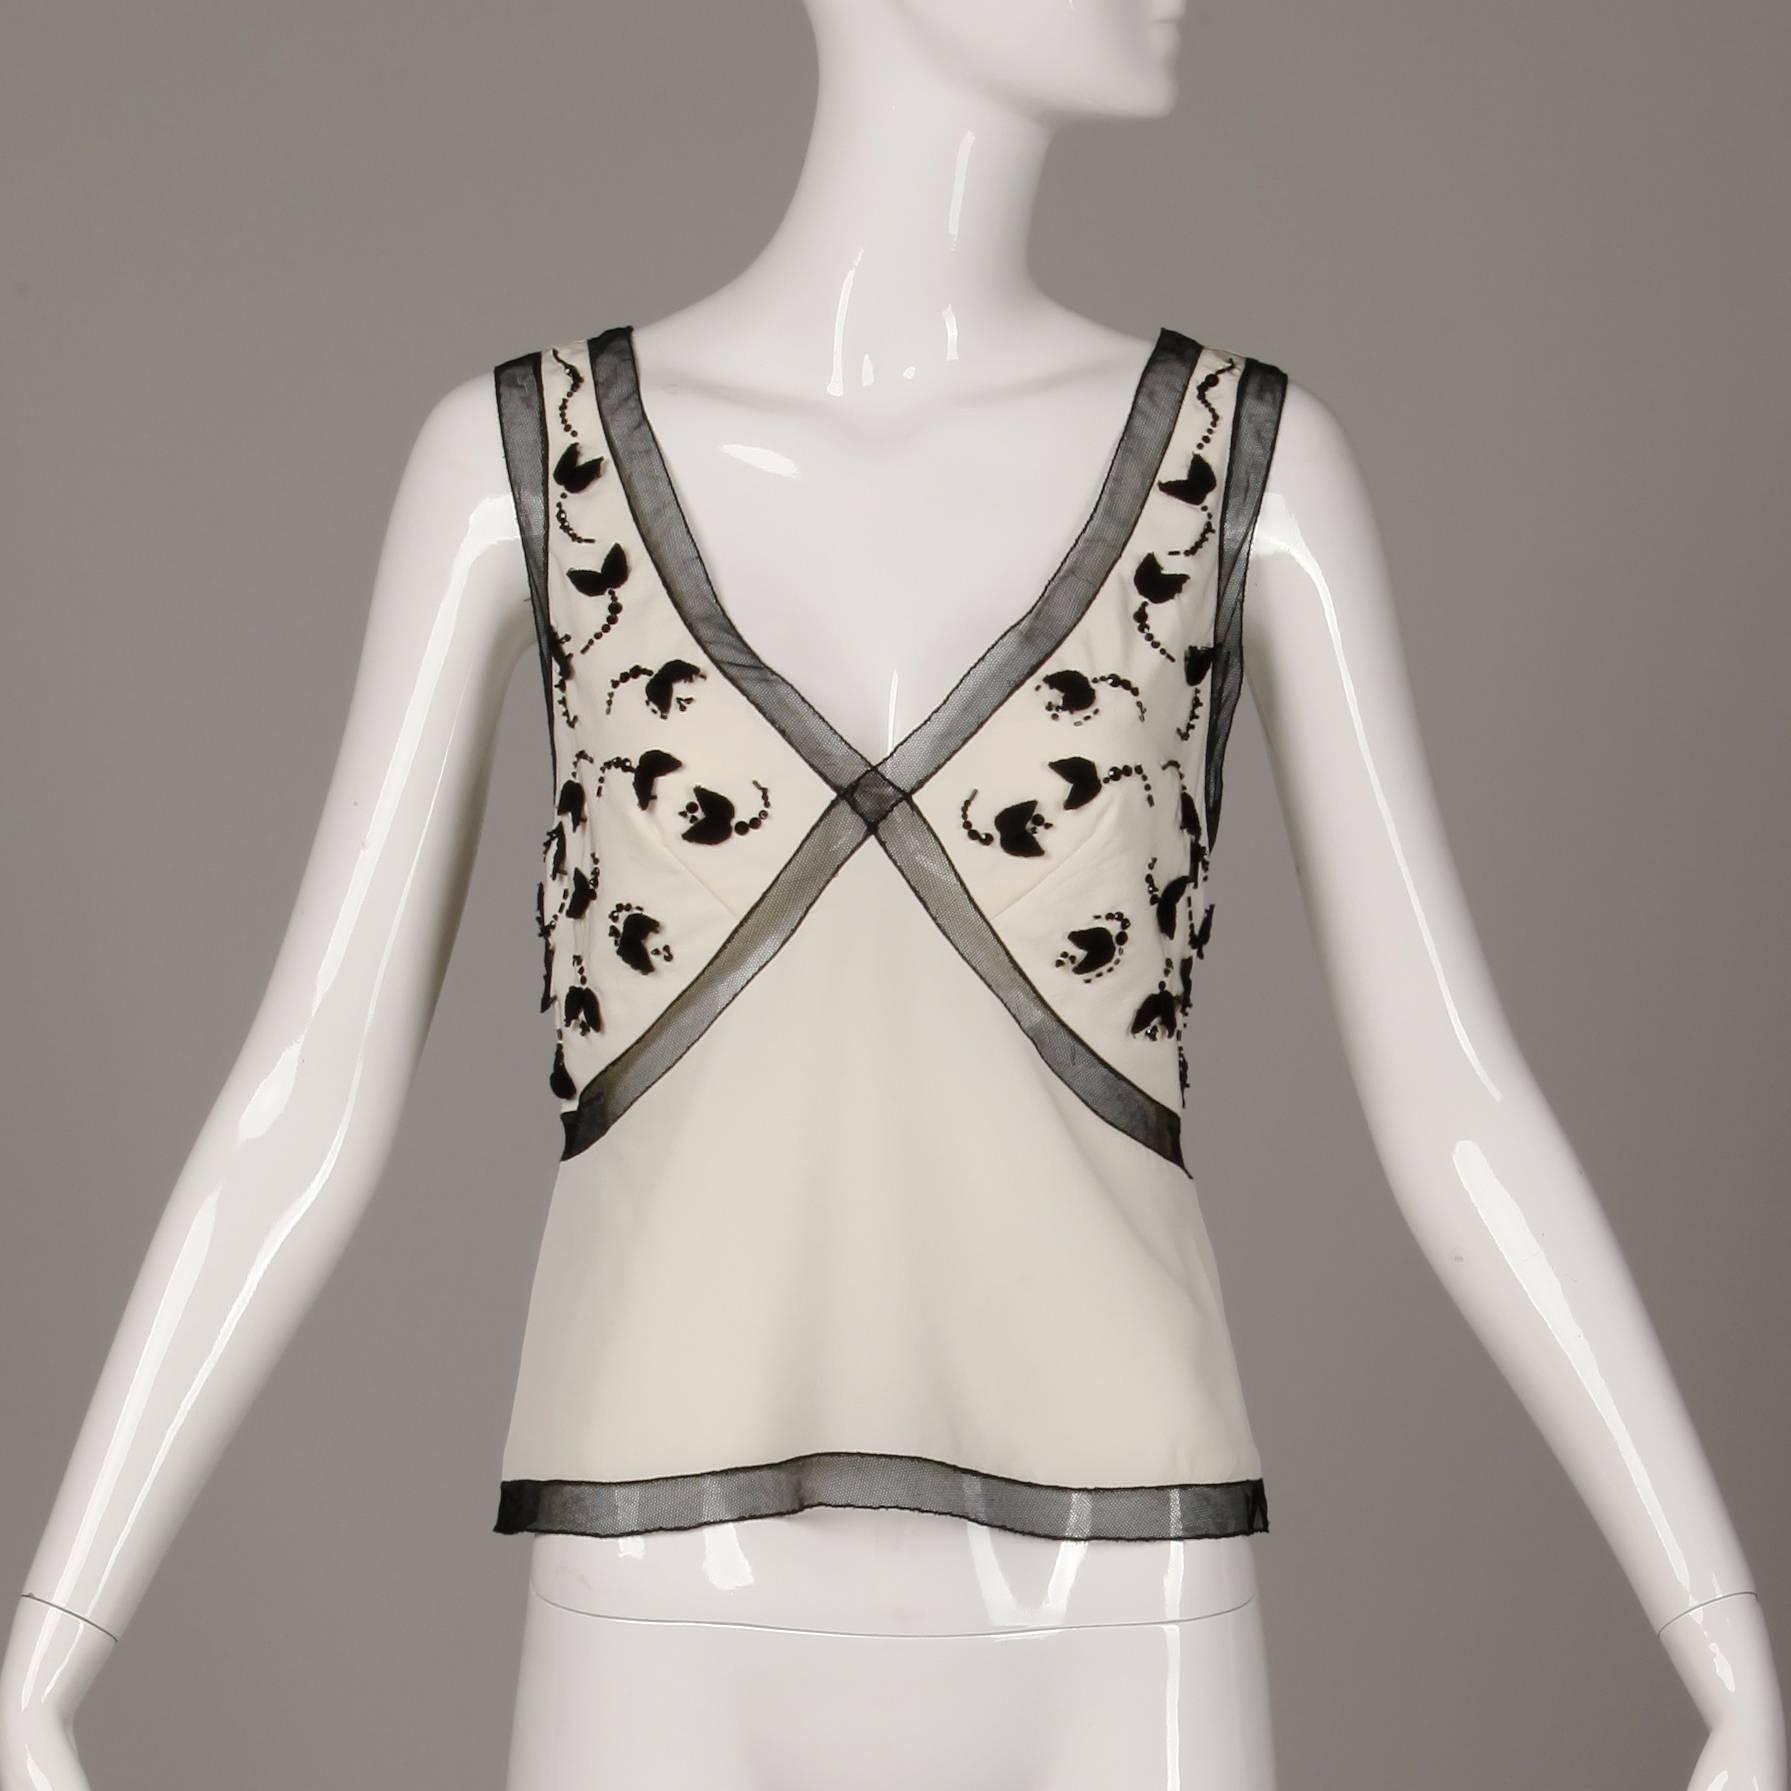 Versatile silk tank by Prada with black mesh, and beaded embellishment. Unlined with side zip and hook closure. The marked size is 42. 100% silk. The bust measures 35", waist 30" and the total length 20.5". Excellent vintage condition